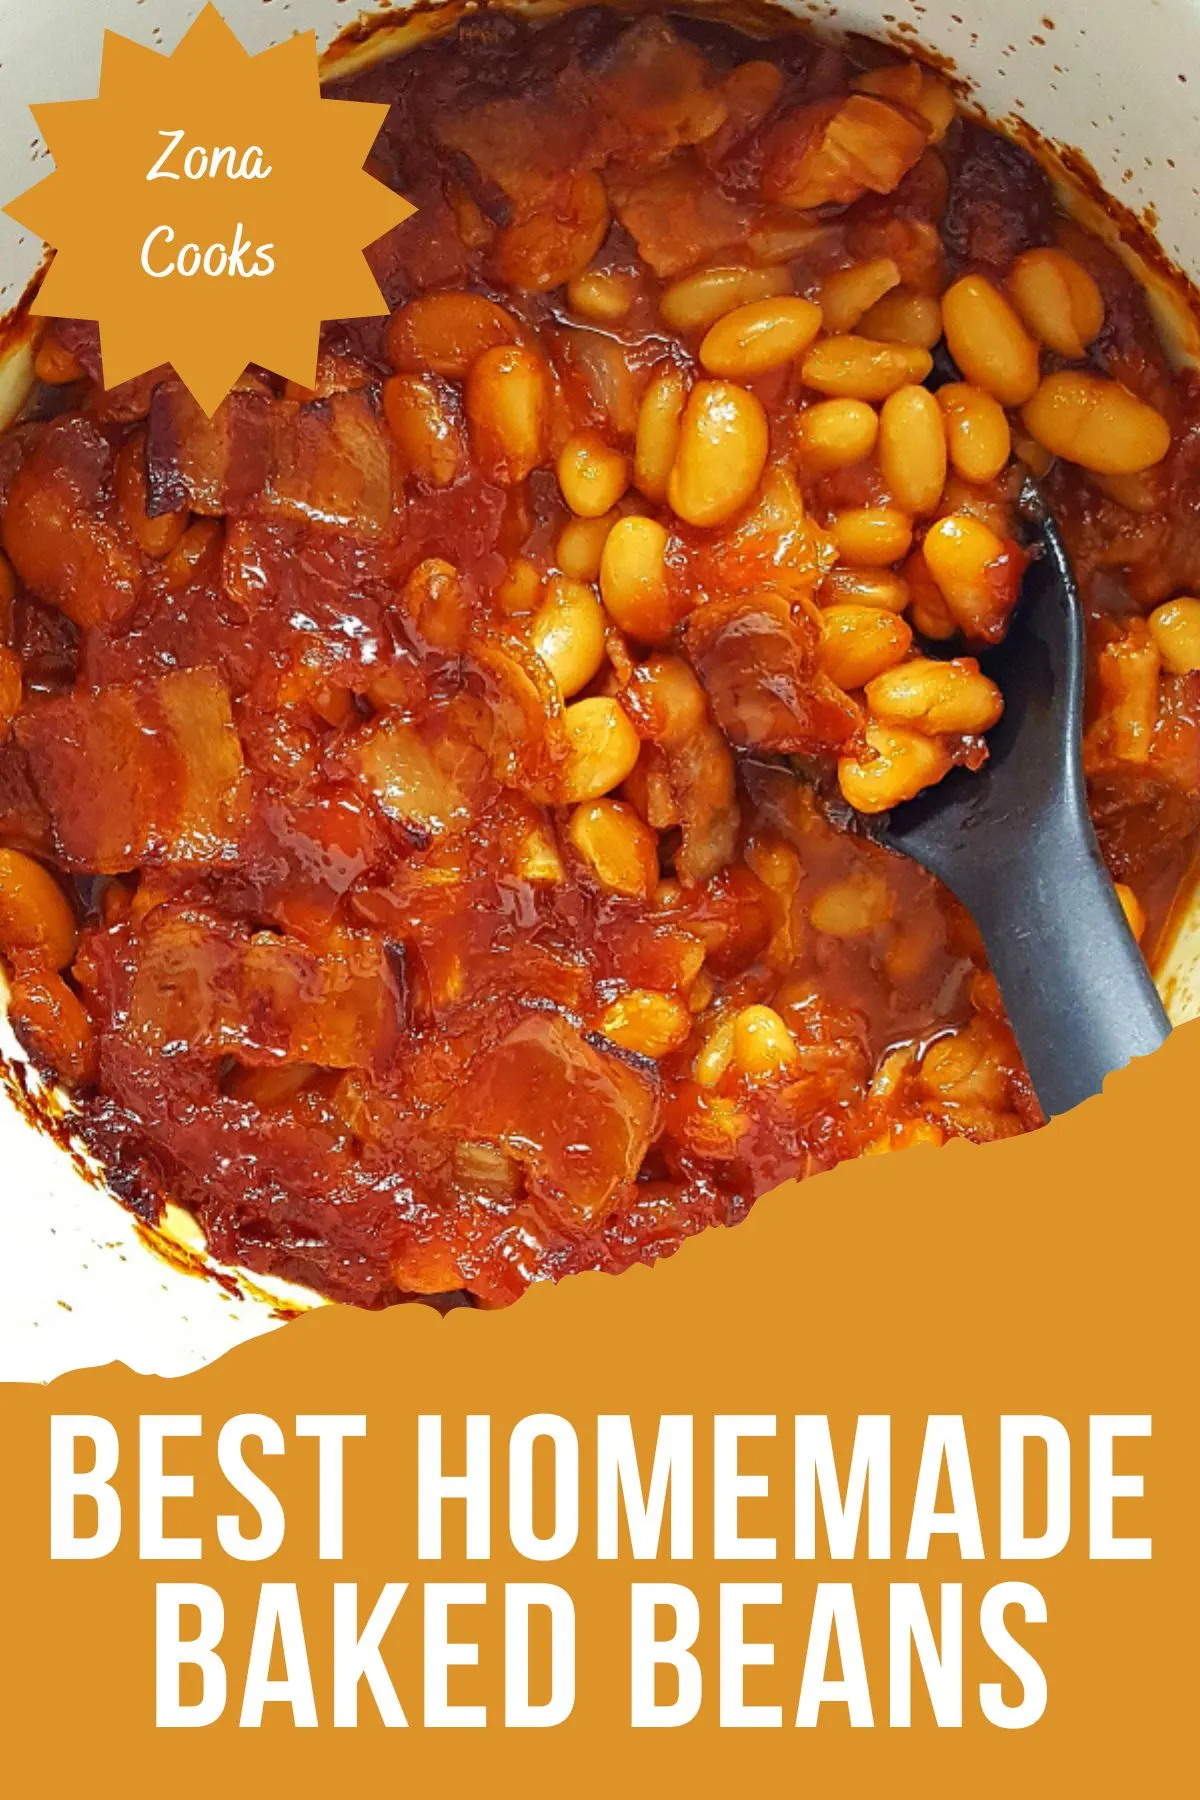 Best Homemade Baked Beans in a baking dish.